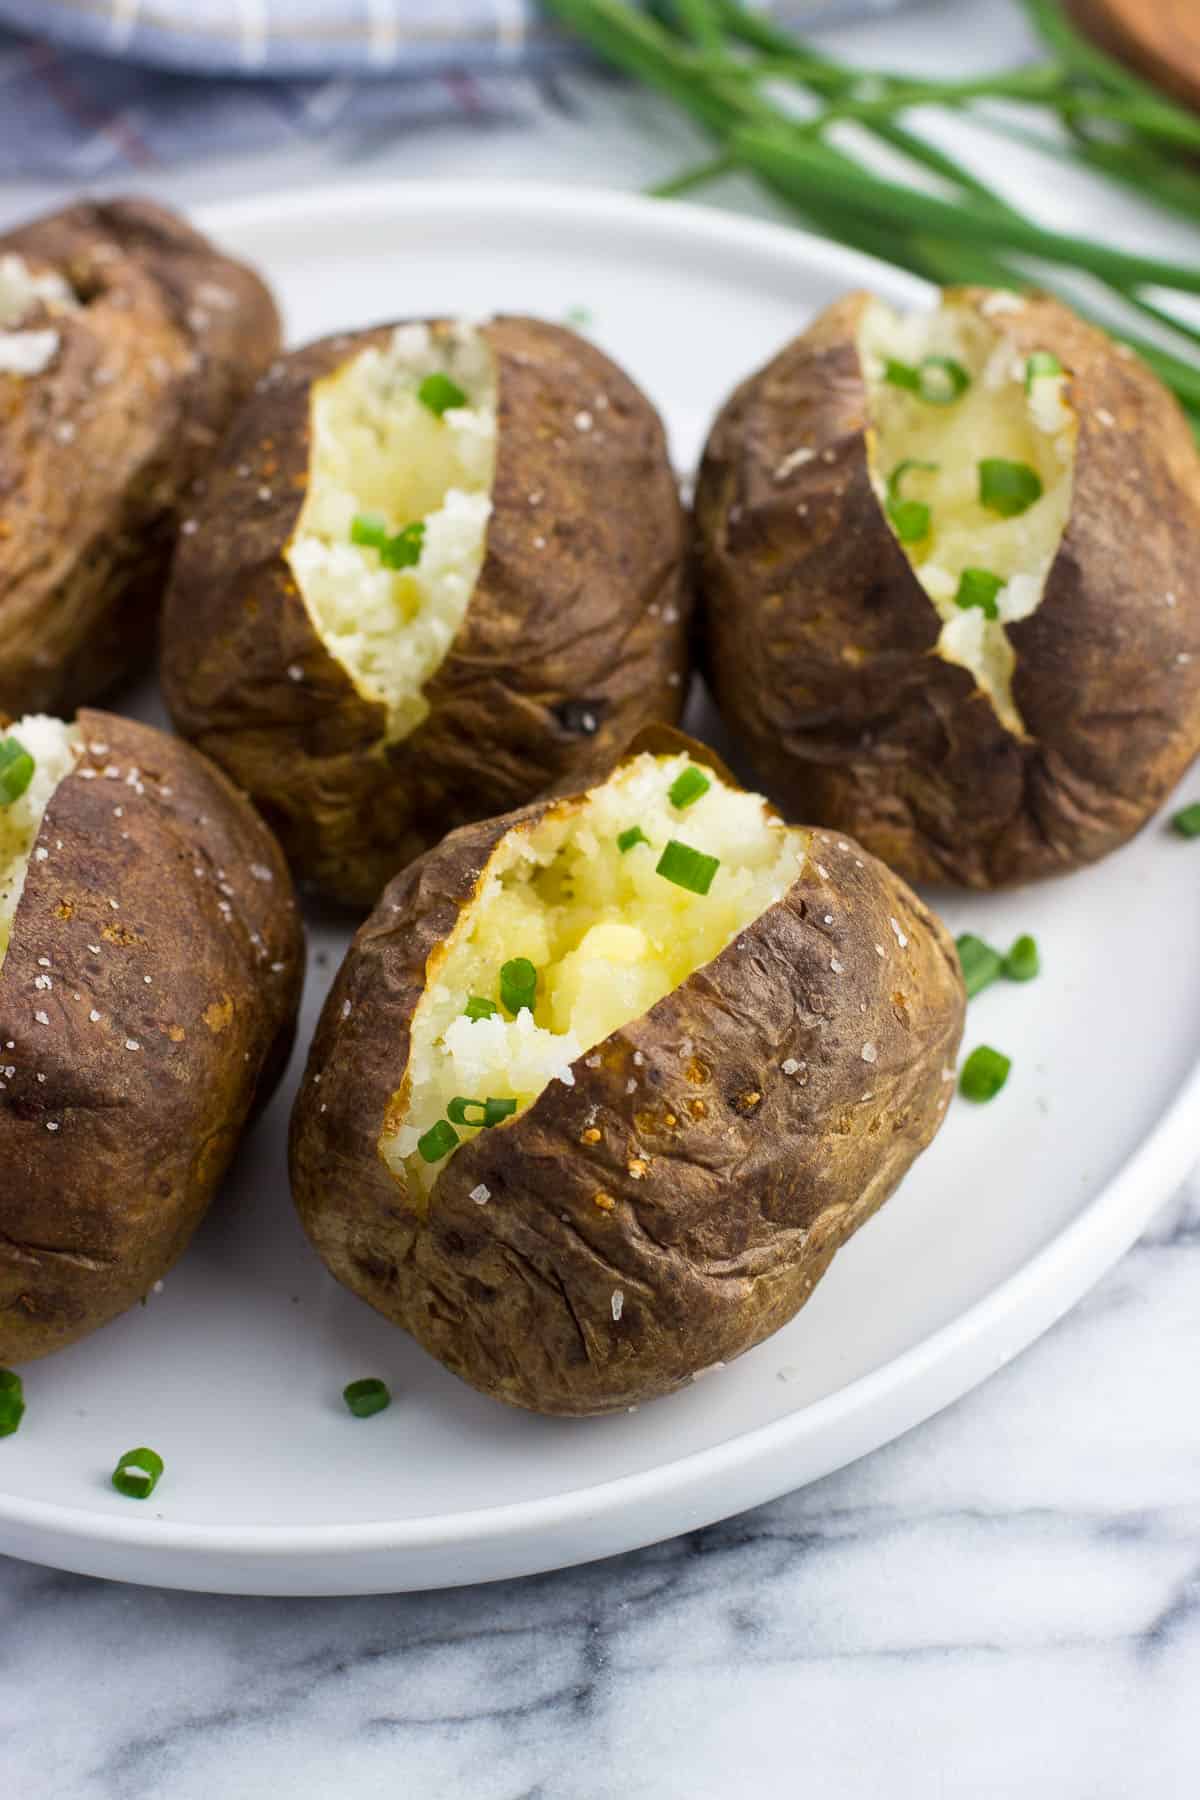 Five baked potatoes on a plate open with butter and chives.